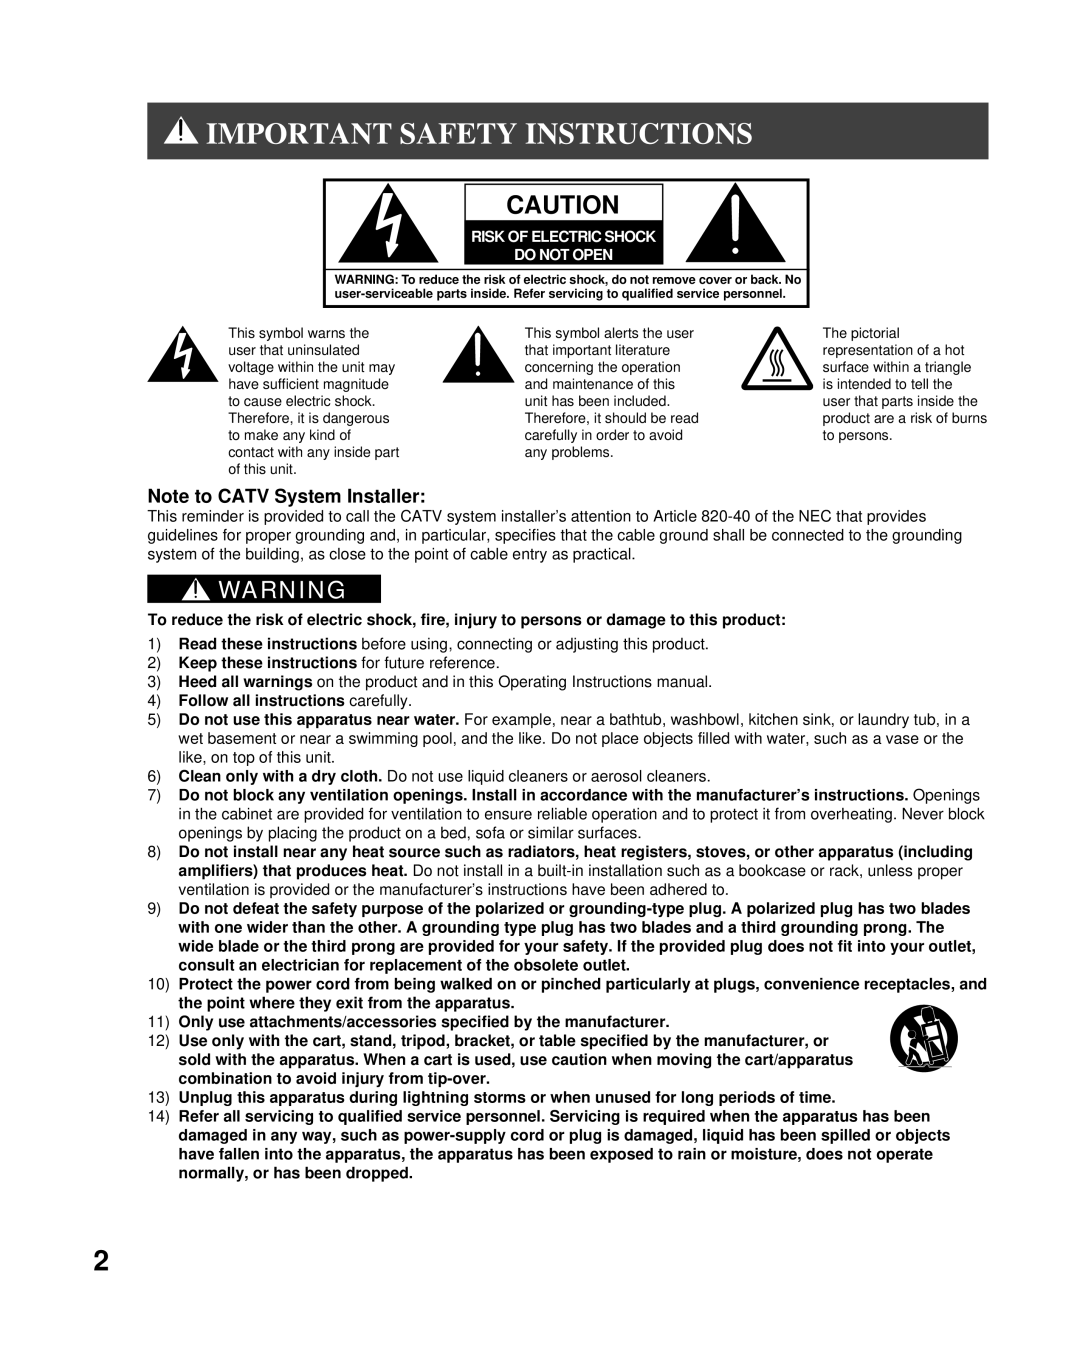 Panasonic PT-56LCX70-K Important Safety Instructions, Note to CATV System Installer, Risk Of Electric Shock Do Not Open 